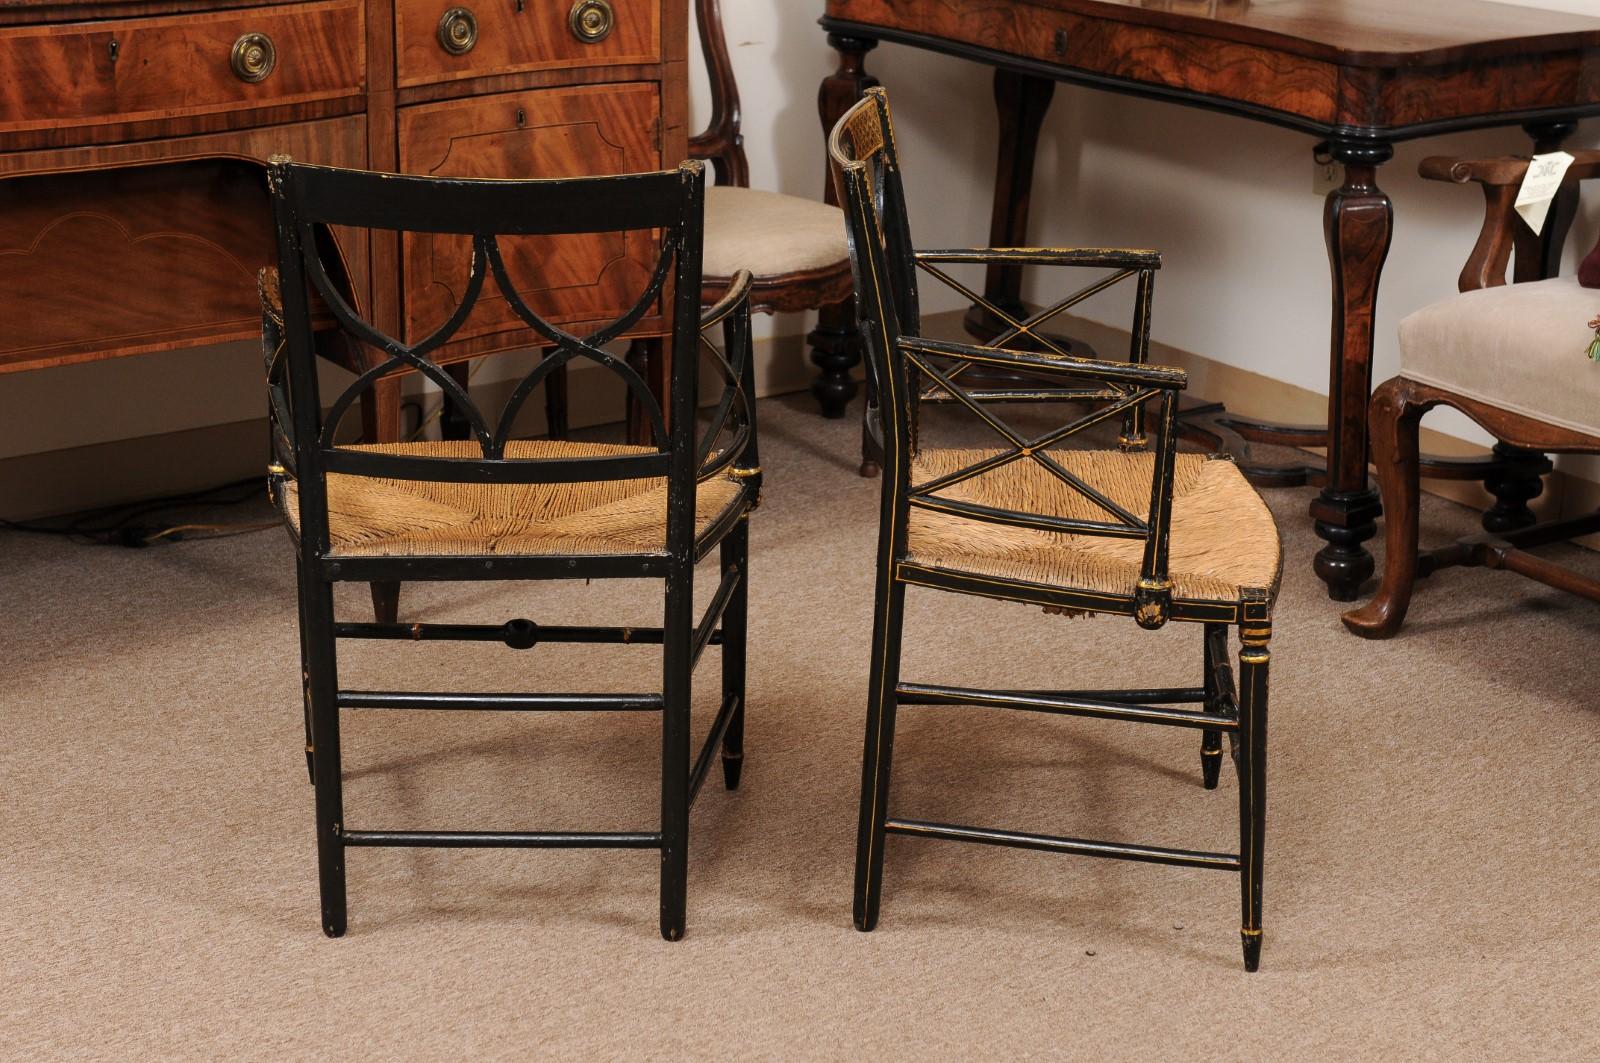  Pair of Regency Black Painted Arm Chairs with Floral Decoration & Rush Seats For Sale 2